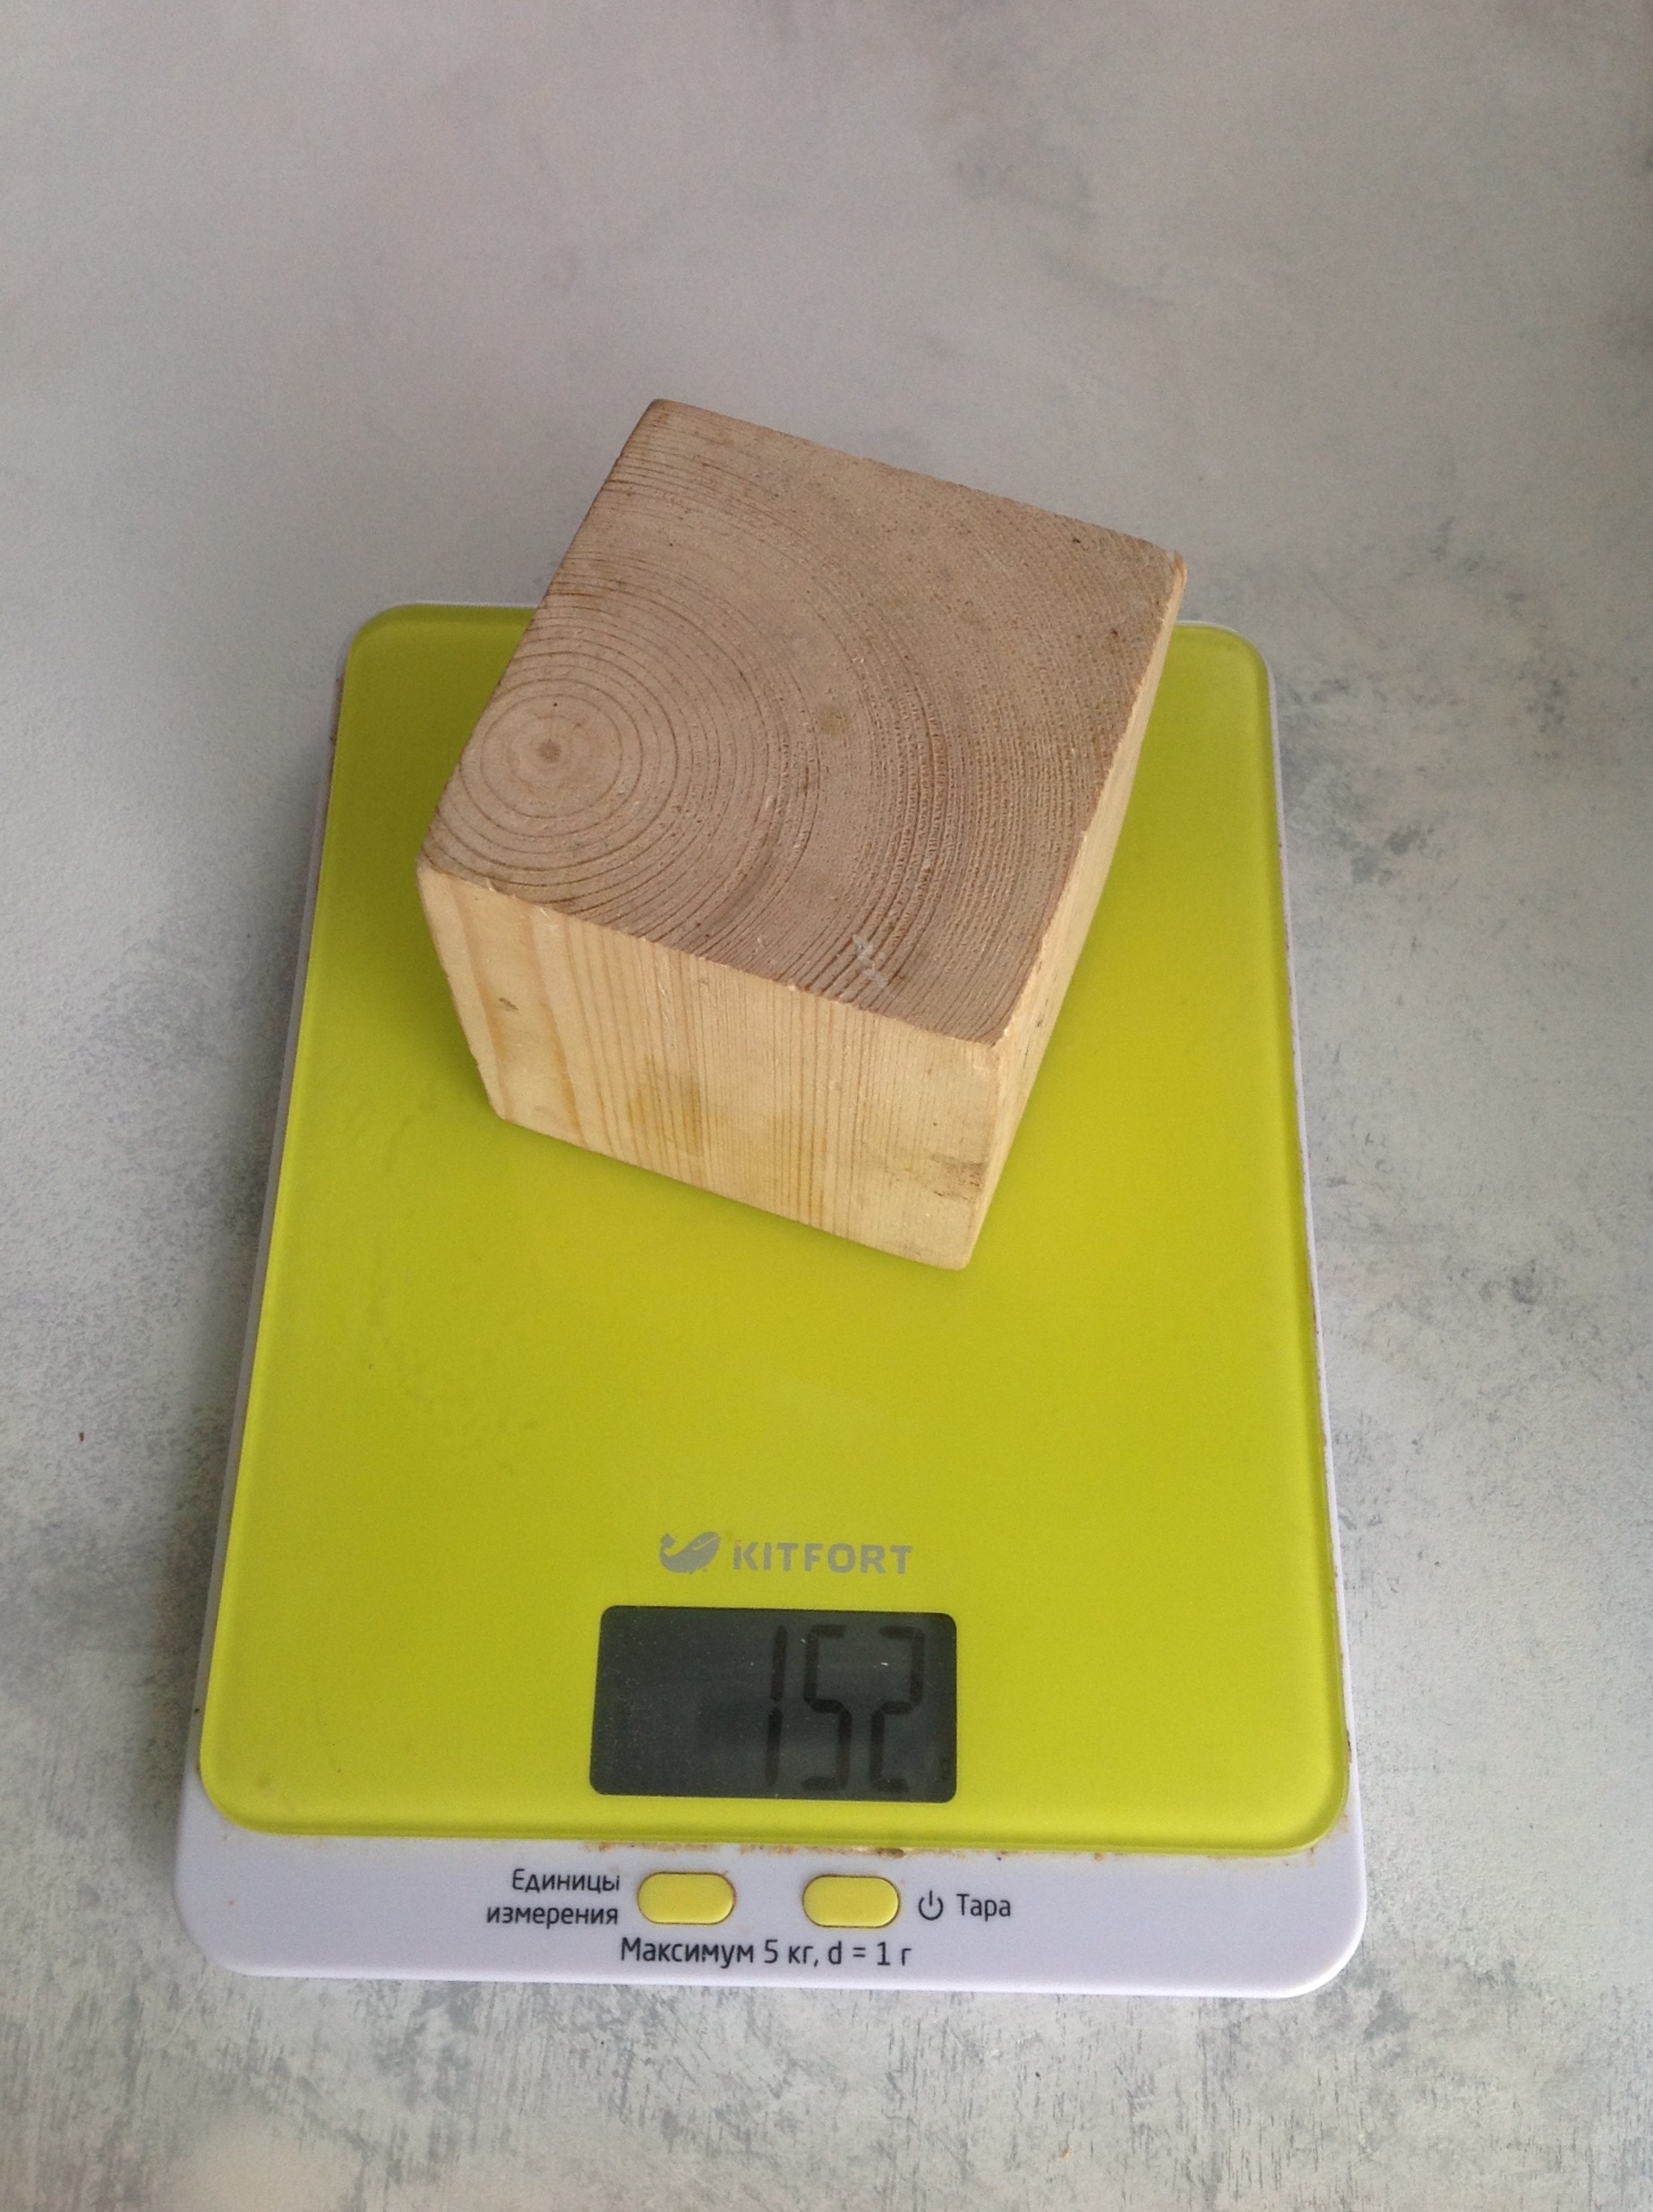 weight of a large wooden cube